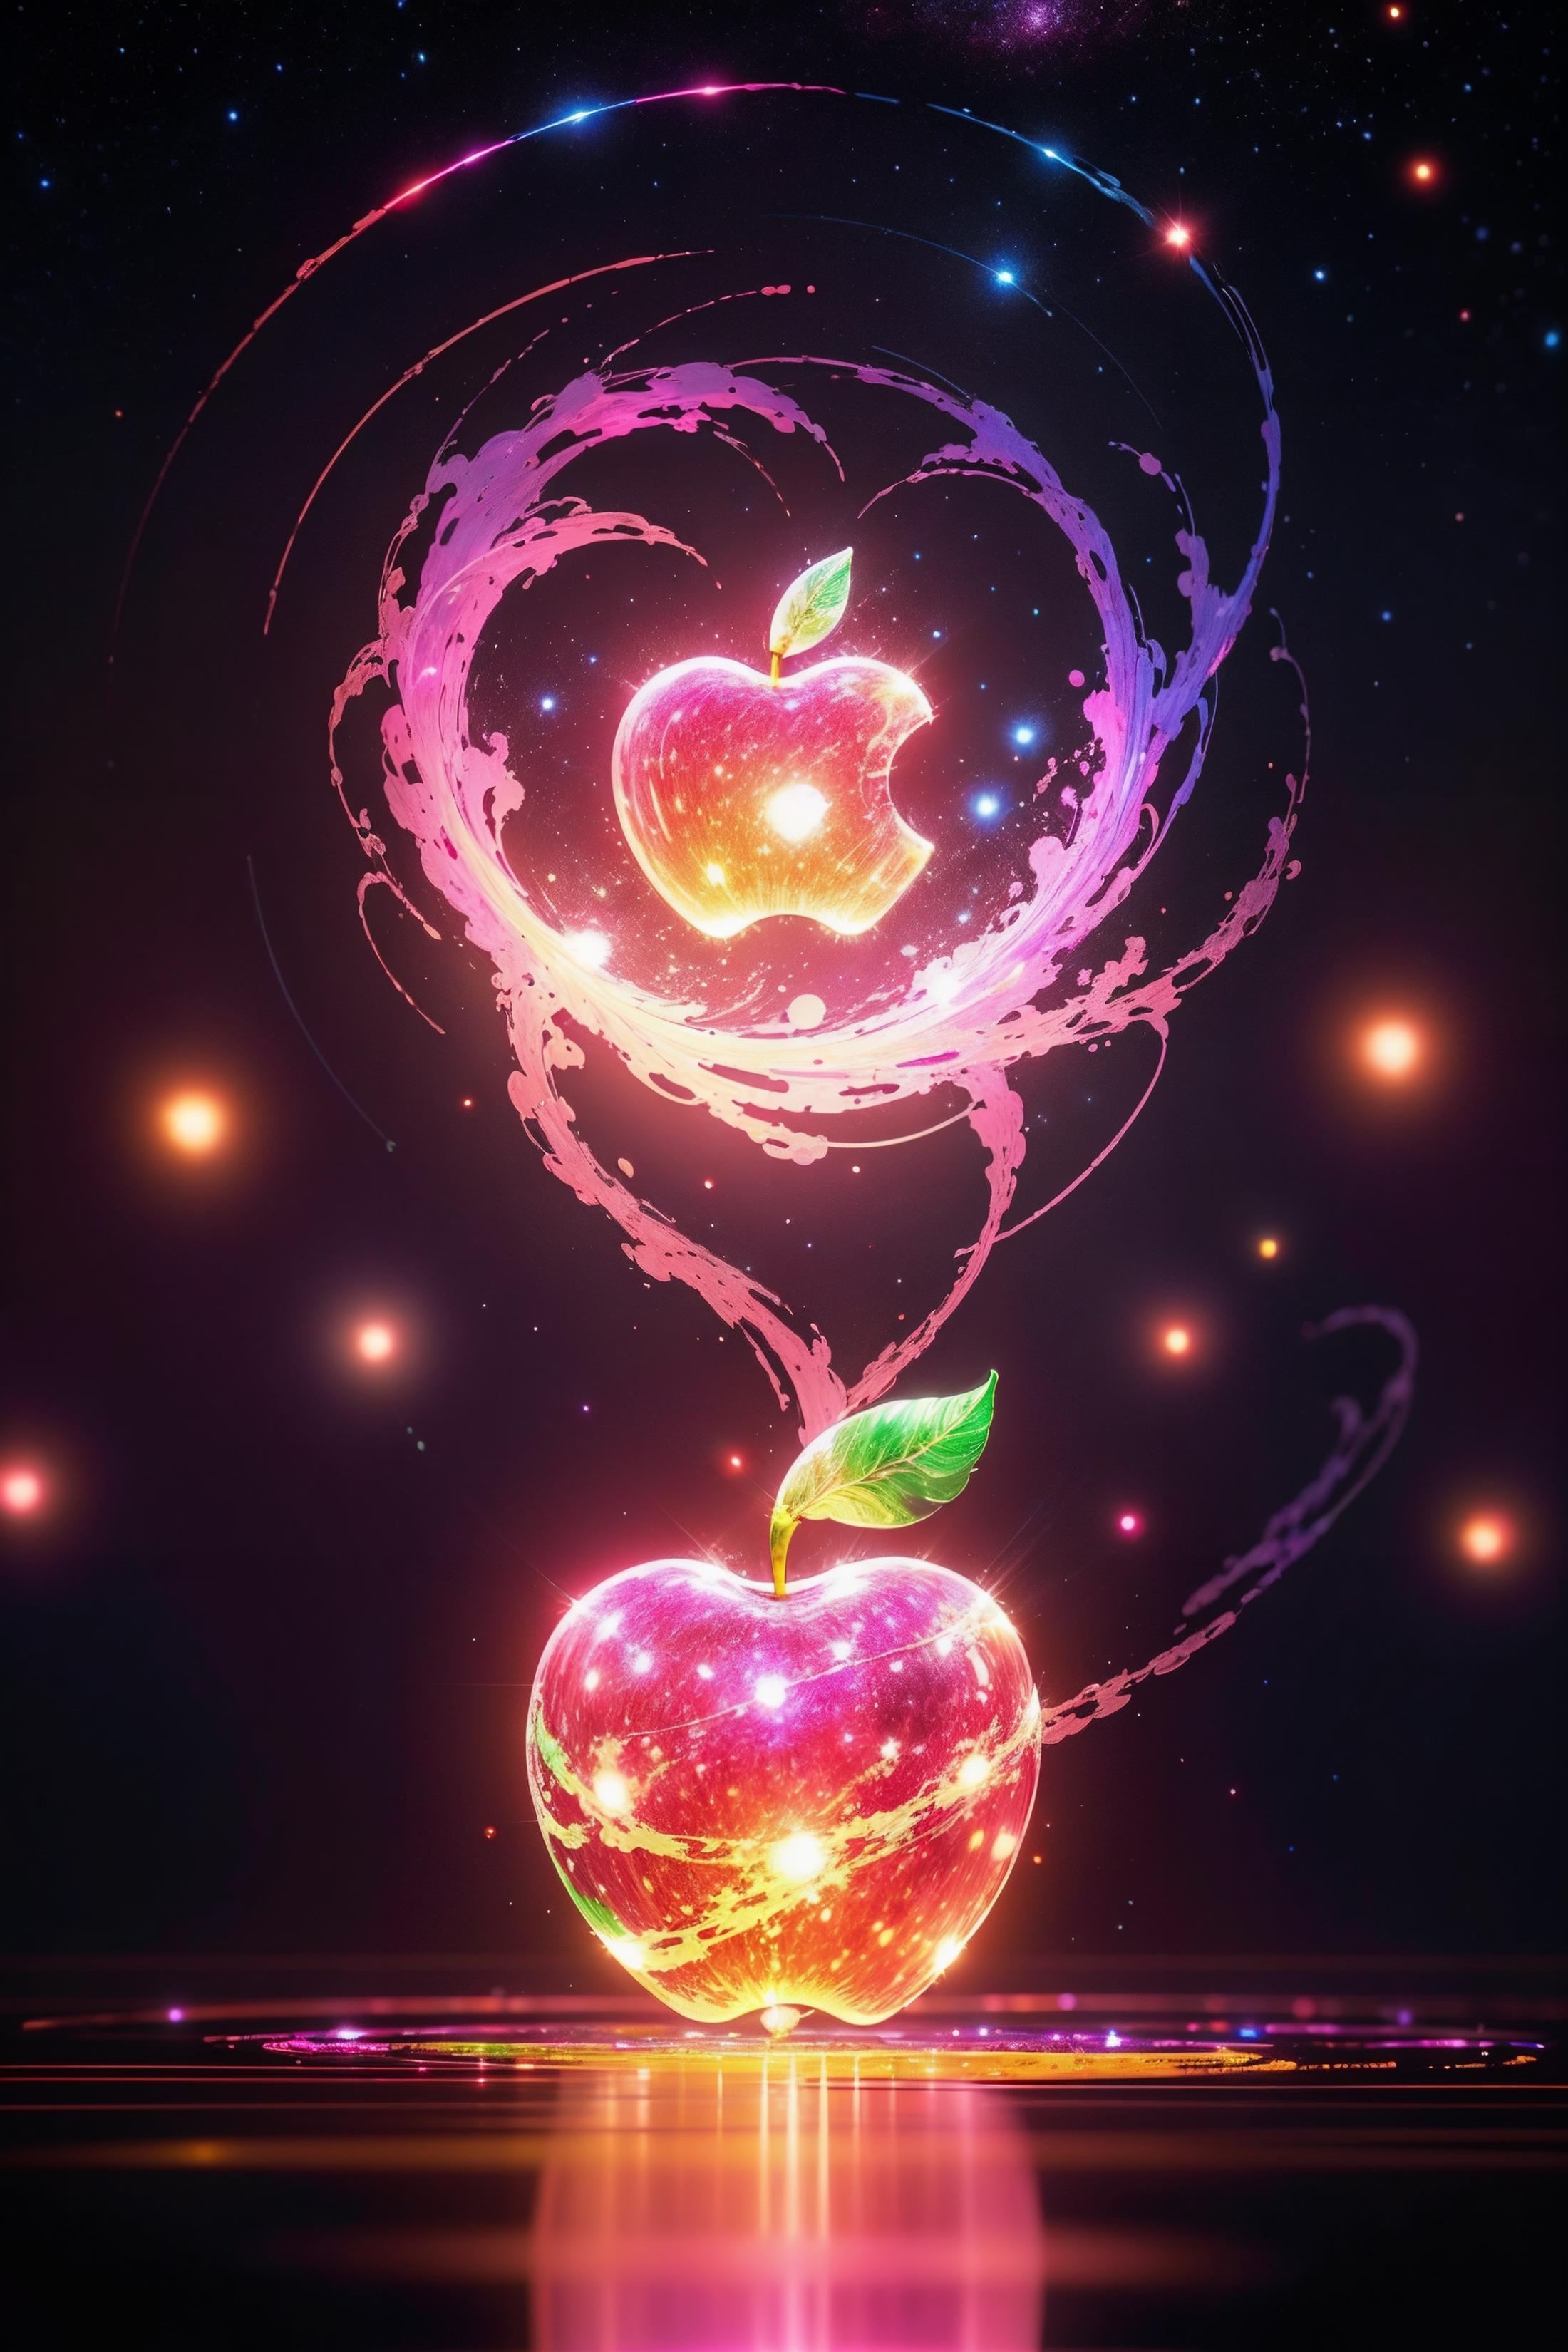 An Apple Logo with a Dazzling Display of Colorful Light Effects at Night.